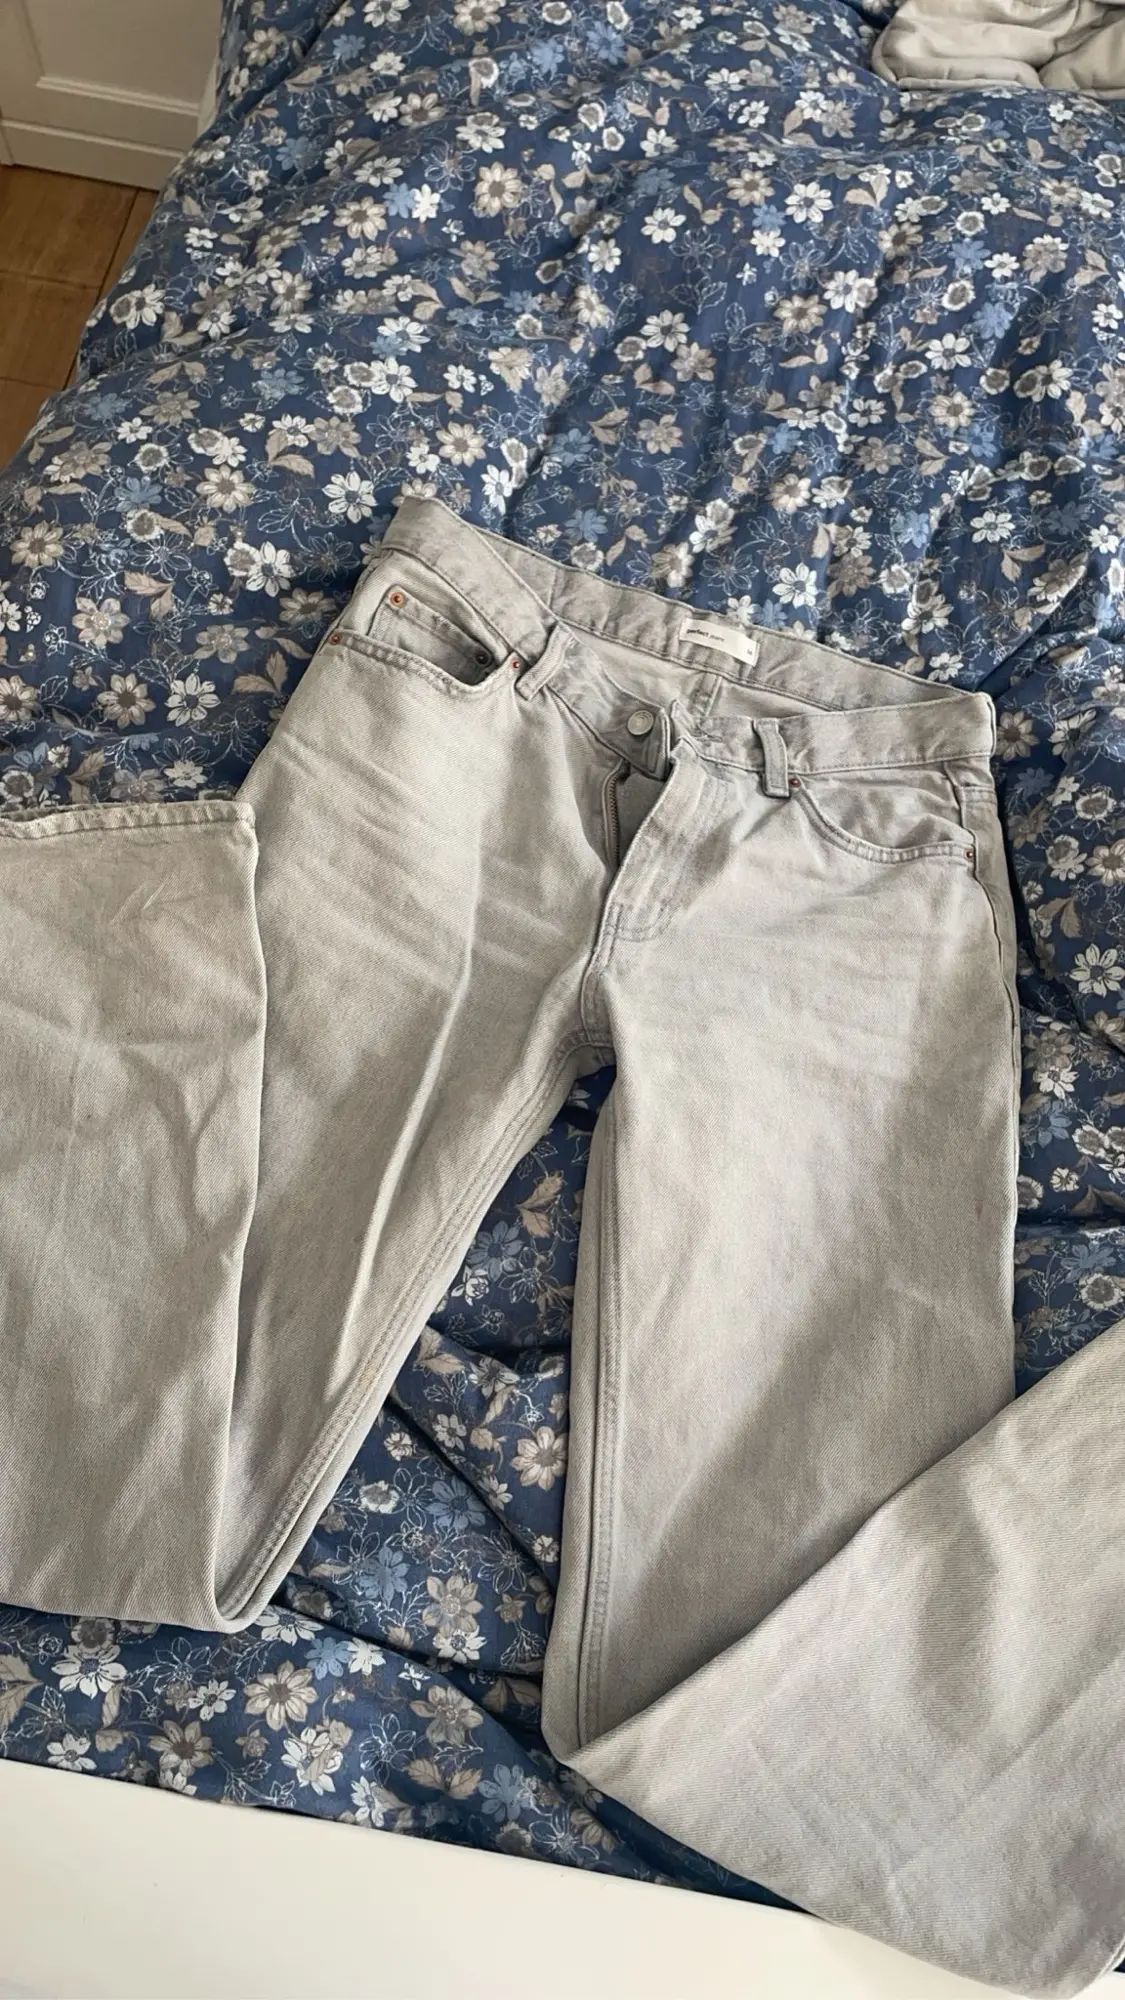 Gina Tricot jeans